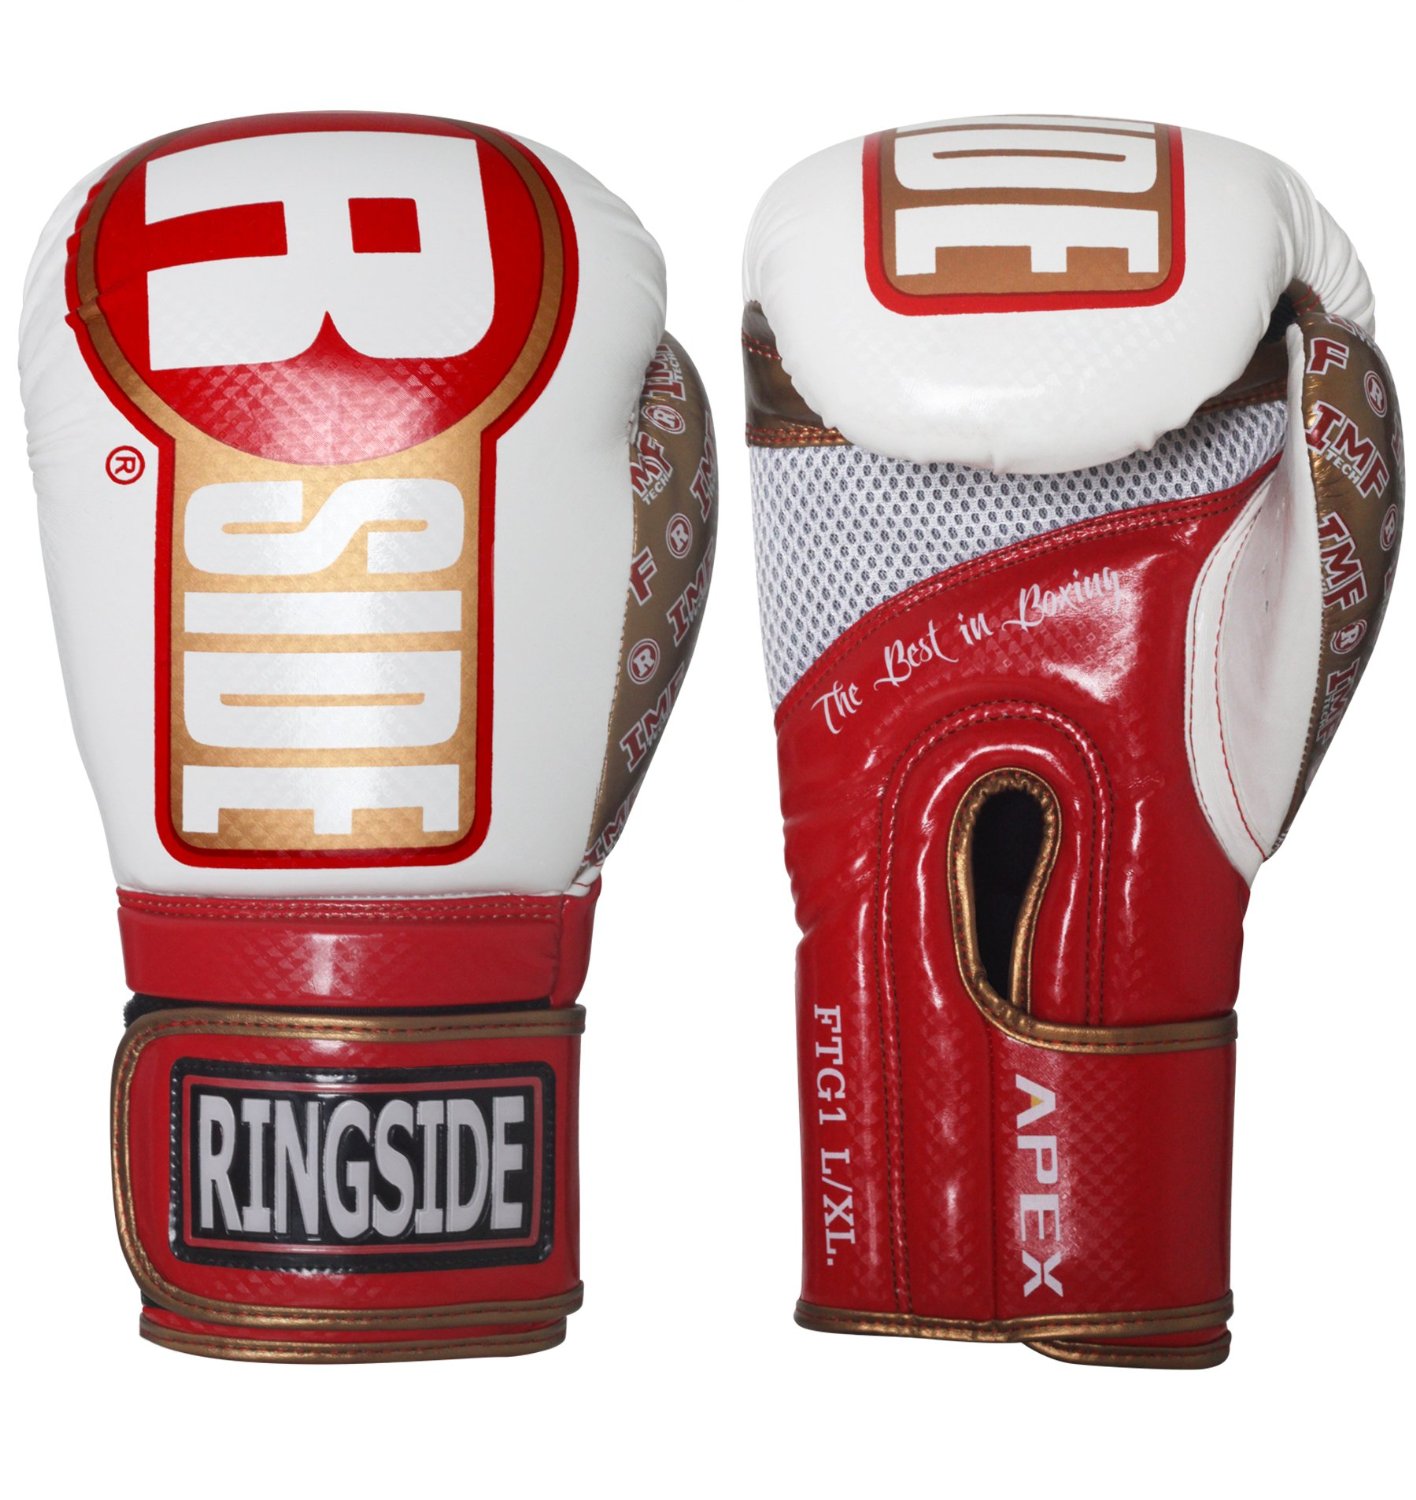 Ringside boxing gloves - Red and white